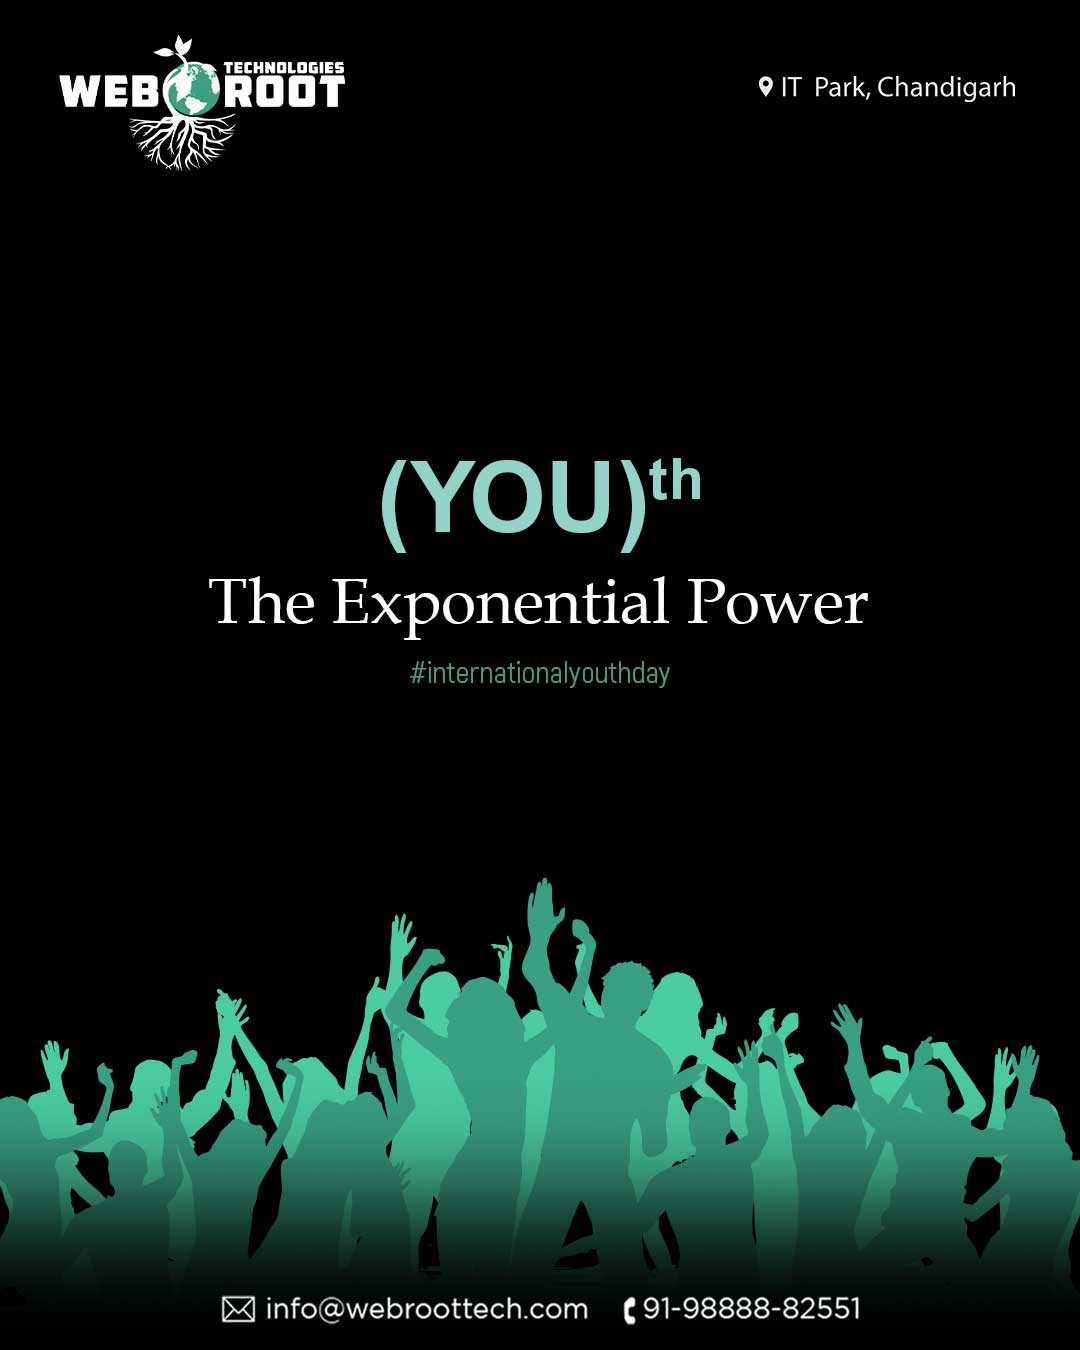 The youth of a country shapes its future. They are the ones with full hope, energy, potential, and determination to achieve anything in their life. Today Youth have the exponential power to become the sovereign of tomorrow.

 Webroot Technologies wishes every Happy International Youth day.

#youthday2022 #YouthDay #youth
#InternationalYouthDay
#todaysgeneration #HappyYouthDay #YouthPower #leadershipdevelopment #youthempowerment #youngsters #leadership #youngpeople #leaders #digitalmarketing #SEO #growwithus #brandingspecialist #webdesignclients #websitedevelopment #graphicdesigning #branding #webroottech #webroottechnologies #webdesign #websitedevelopment #developer #graphicdesigners